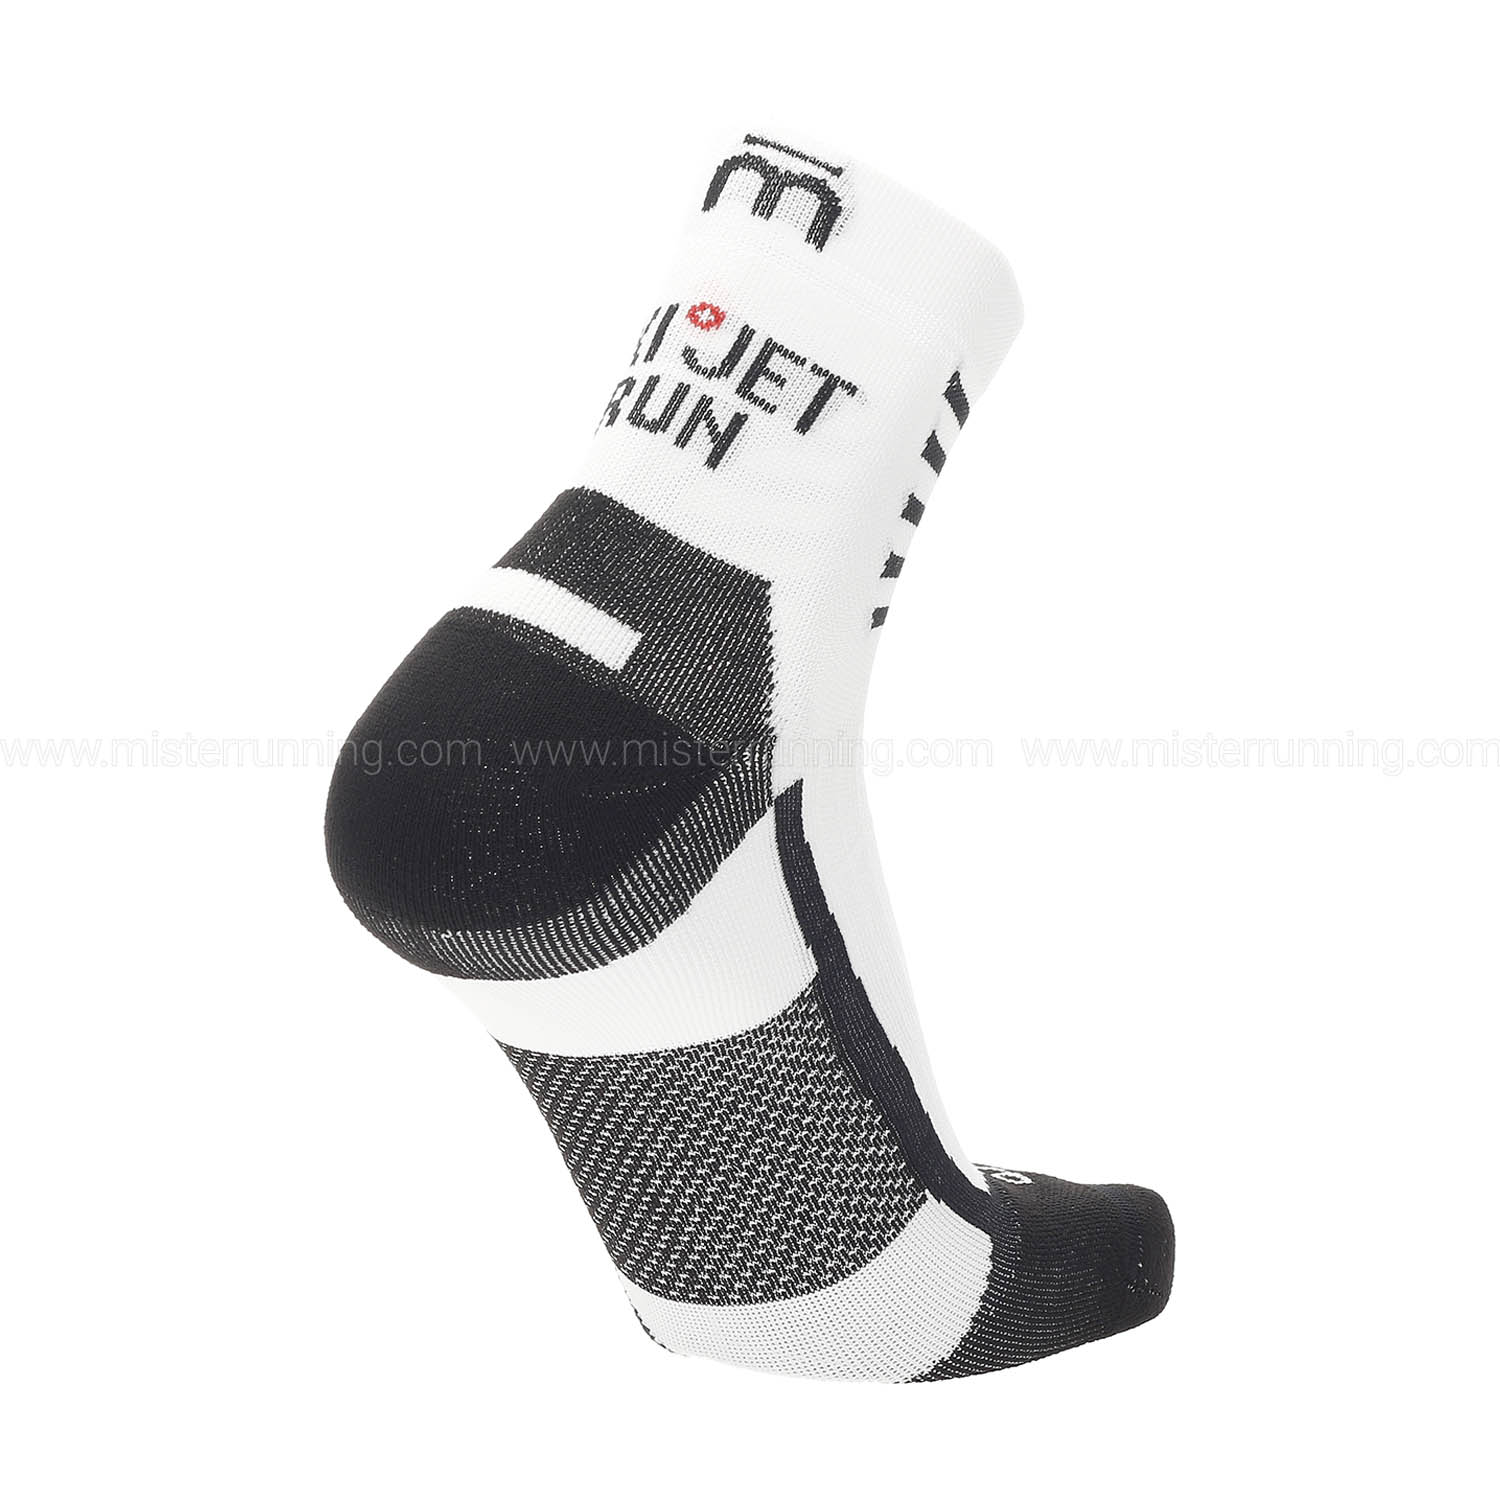 Mico Oxi-jet Light Weight Compression Calze - Bianco